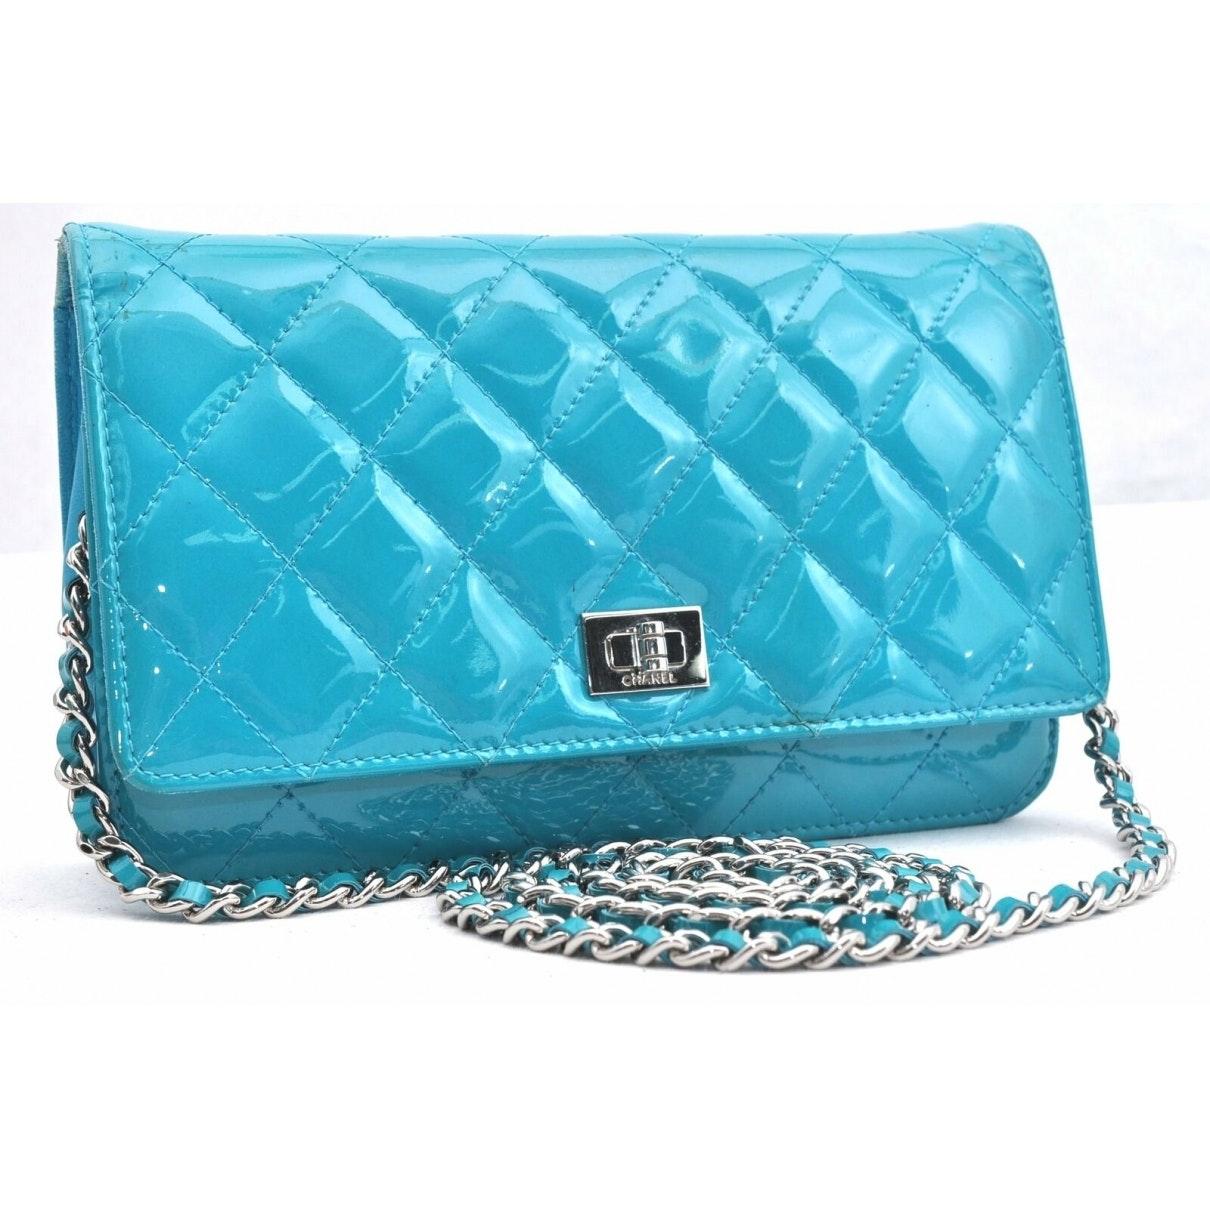 Chanel 2.55 Patent Leather Clutch Bag in Blue - Lyst